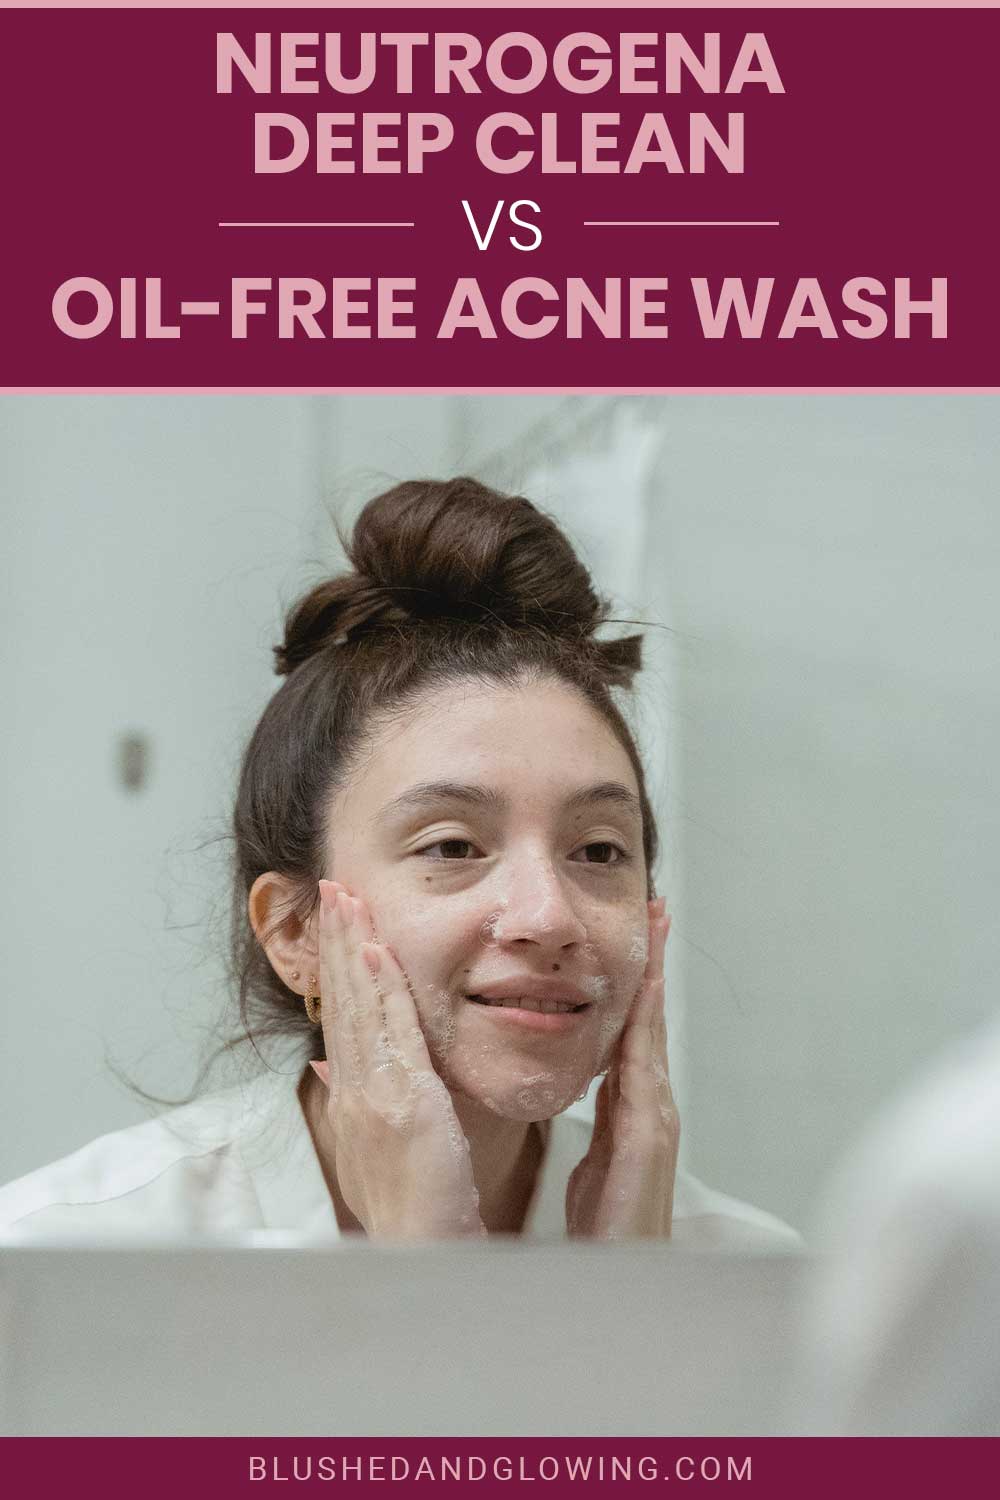 Woman smiling and applying facewash on her face - Neutrogena Deep Clean vs. Oil-Free Acne Wash.